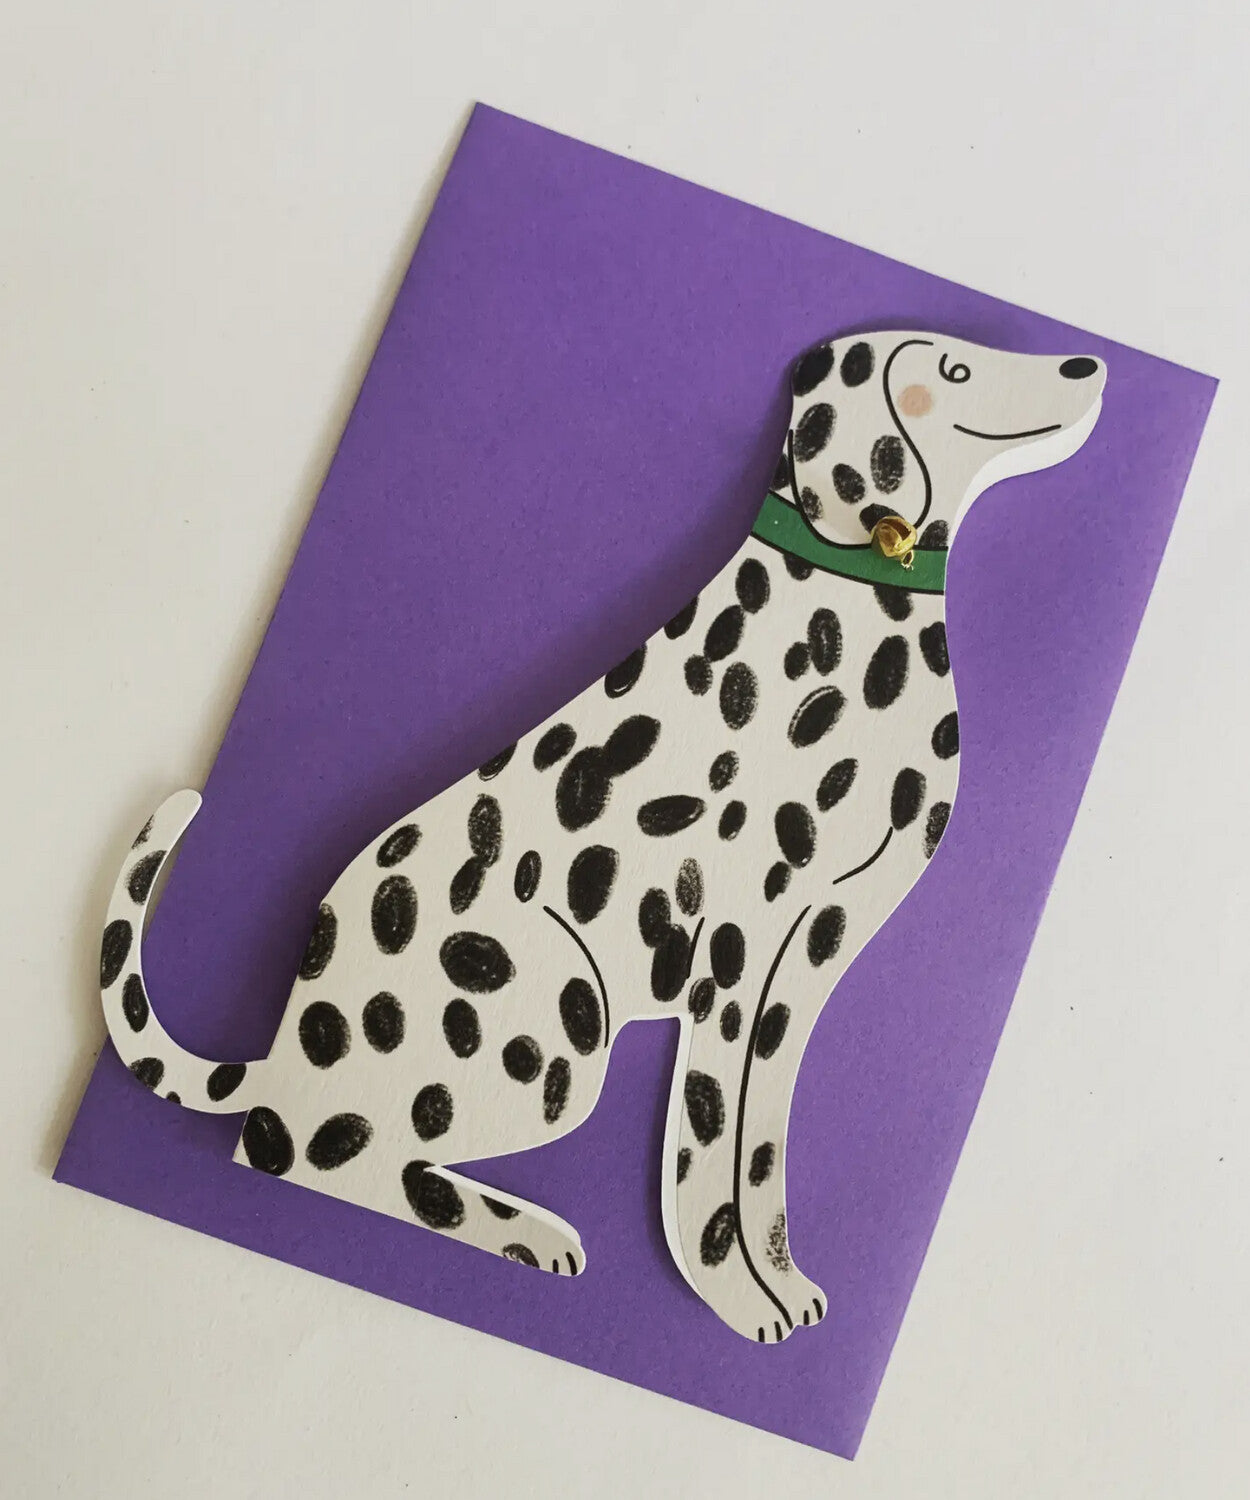 Sitting Dalmatian Greeting Card with bell